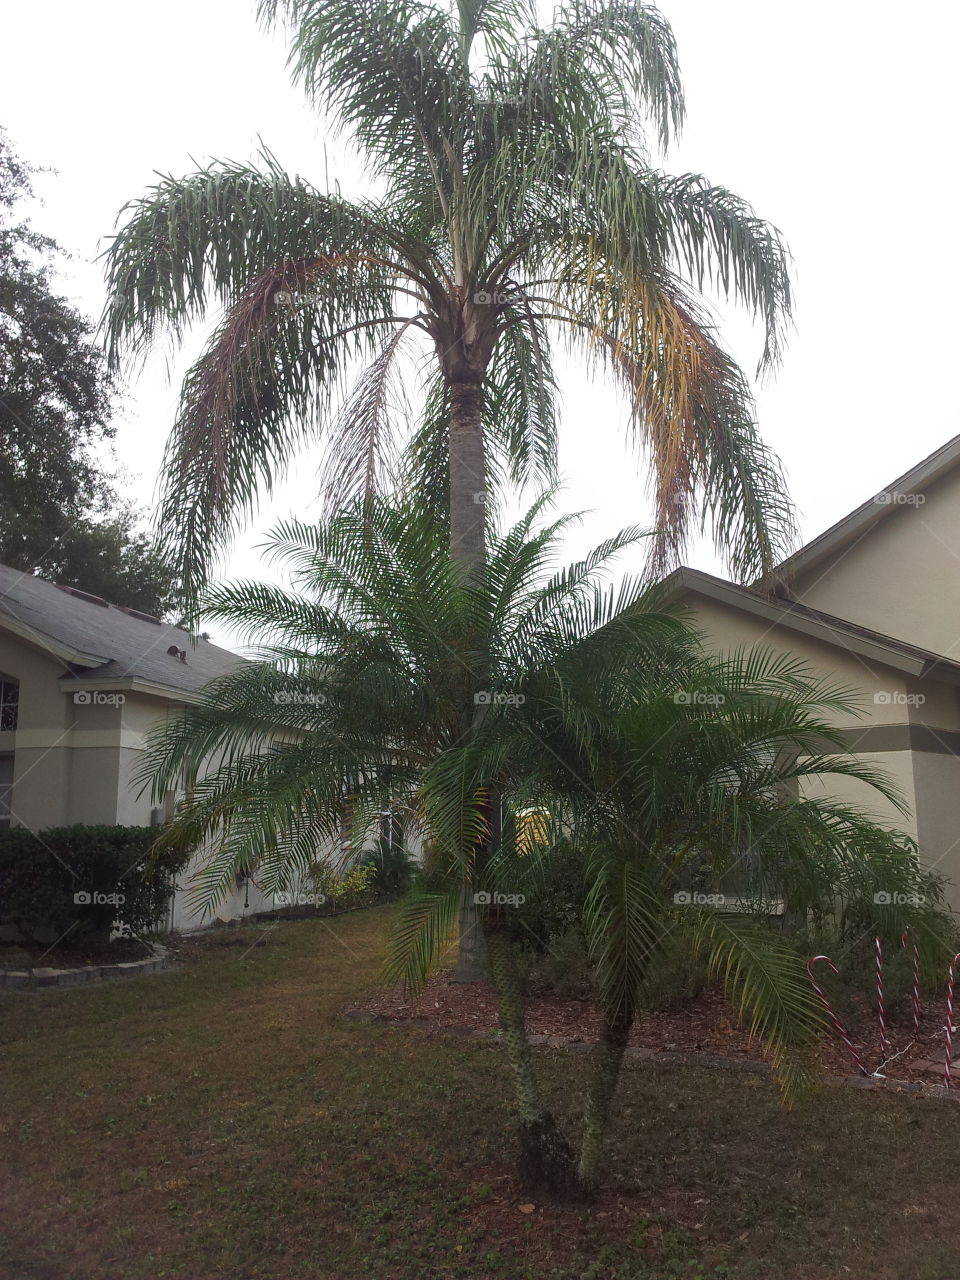 Palm trees in front of someone’s house at Brandon, FL